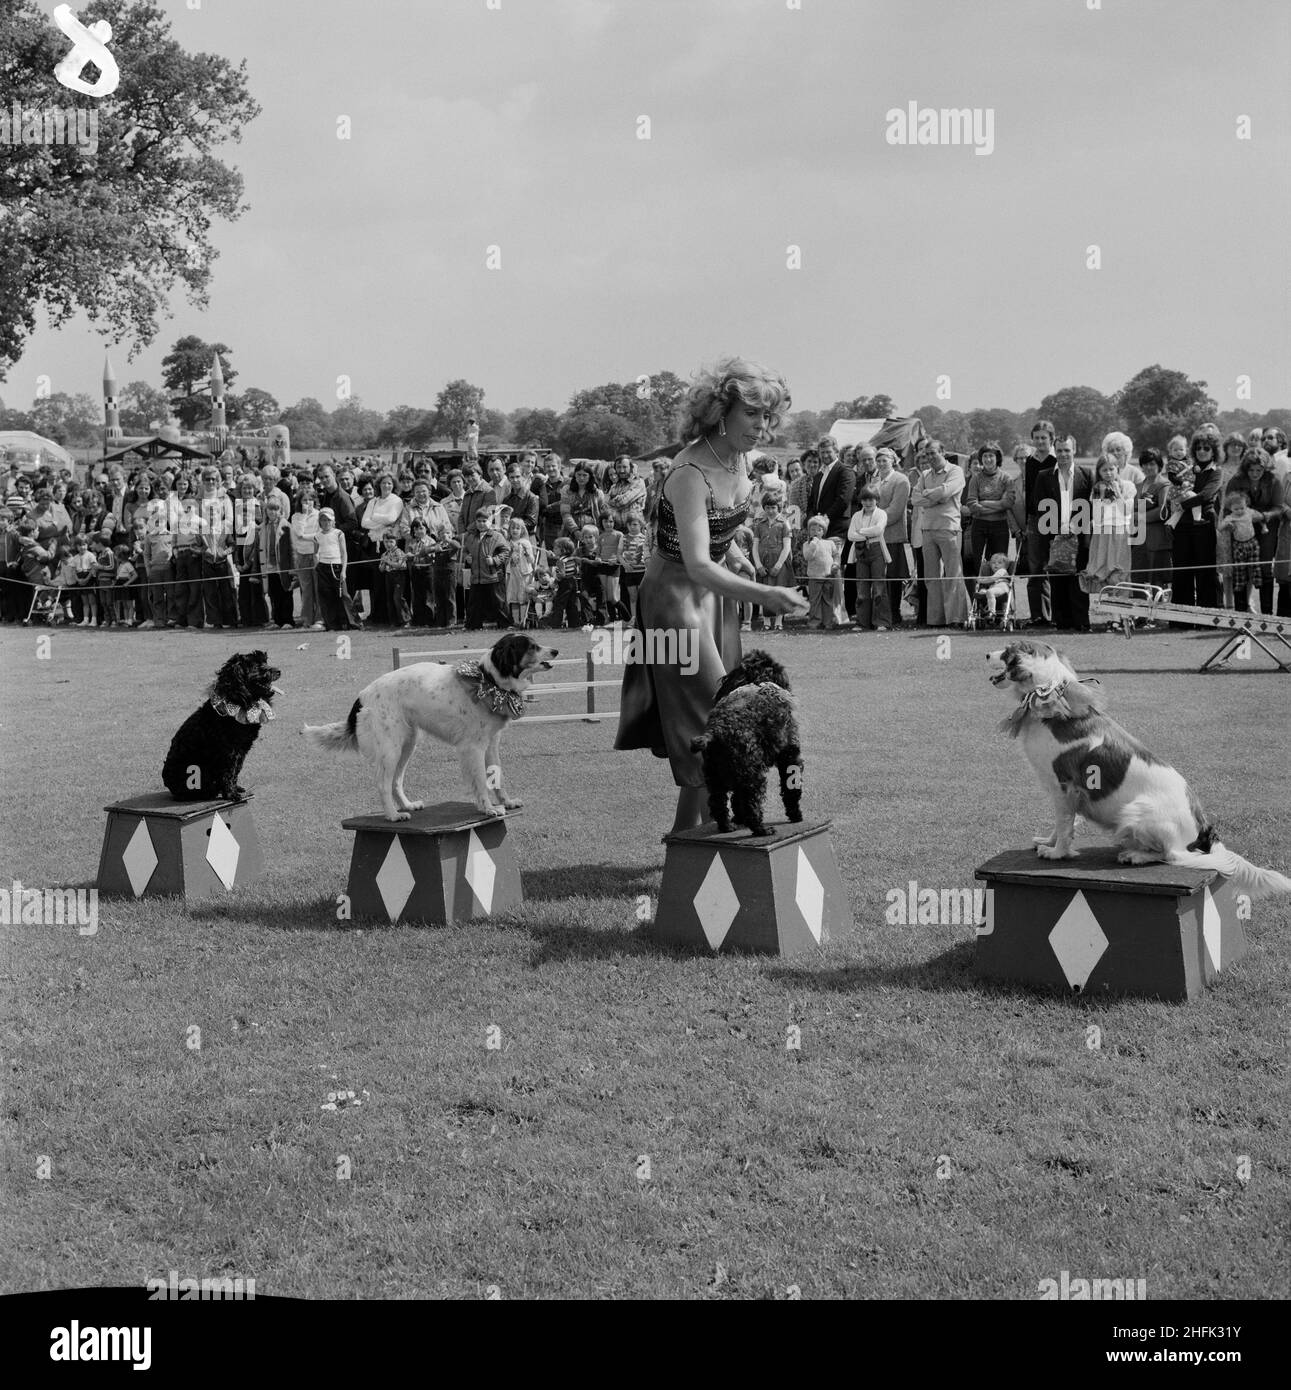 Laing Sports Ground, Rowley Lane, Elstree, Barnet, London, 16/06/1979. A crowd of people watching a woman with performing dogs on pedestals at the annual Laing Gala Day. An article published in August 1979 in Laing's monthly newsletter 'Team Spirit' describes that Gandey's Miniature Circus attended the event with acts including performing dogs, horses, llamas and a snake. Stock Photo